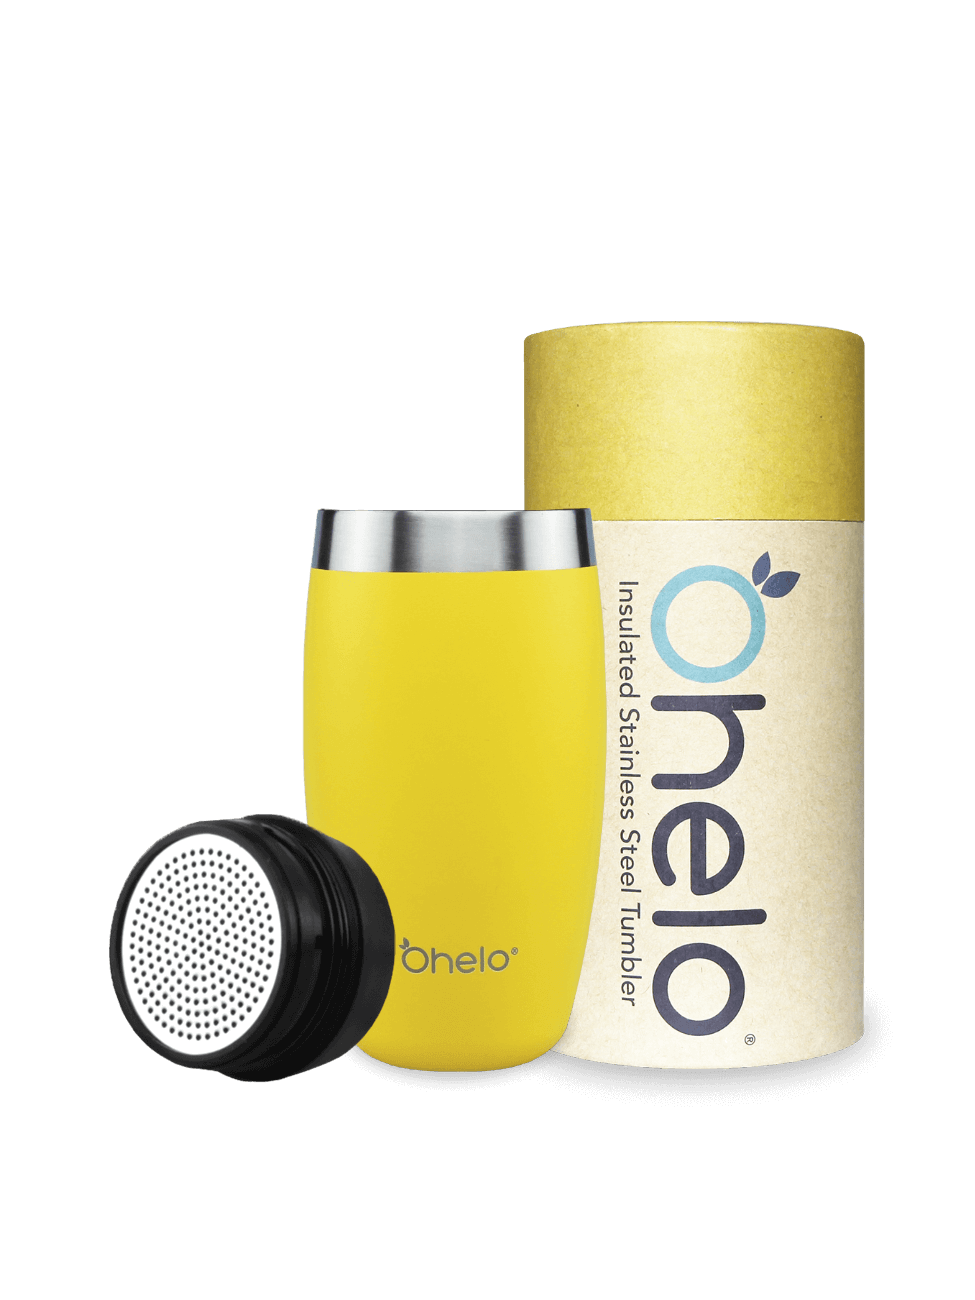 Ohelo dishwasher safe travel mug in yellow with removable tea strainer and recycled packaging